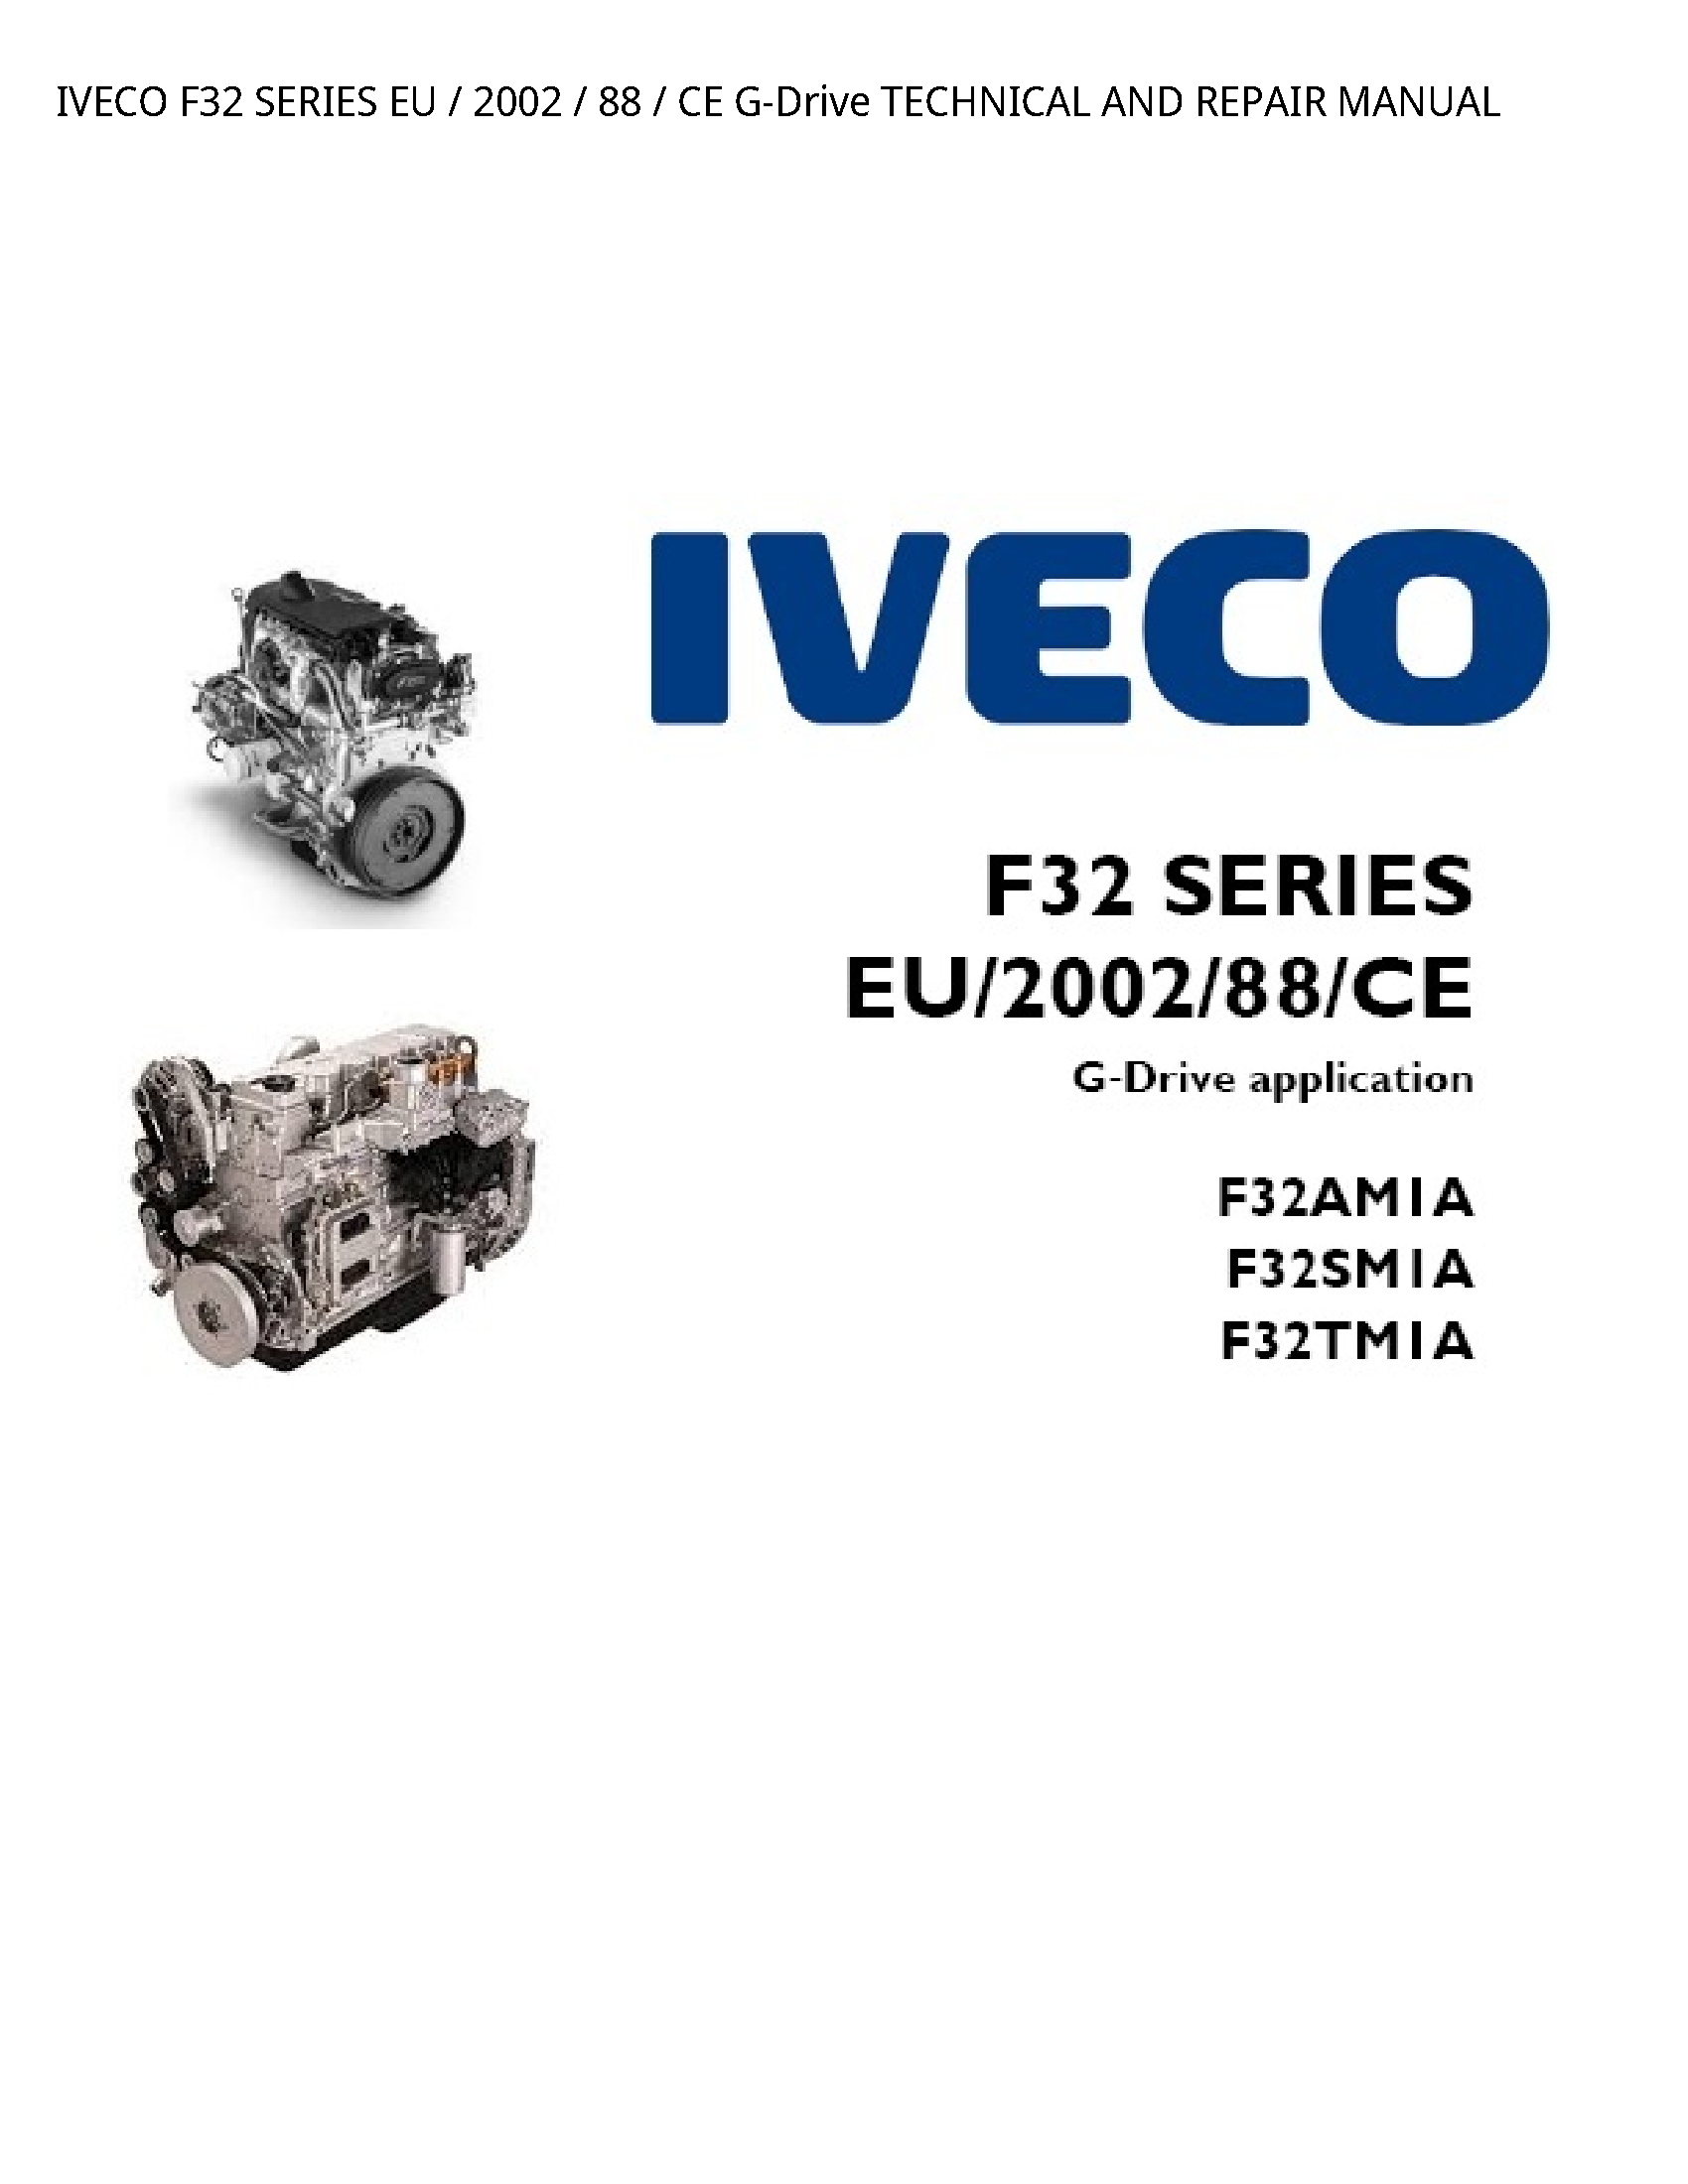 Iveco F32 SERIES EU CE G-Drive TECHNICAL AND REPAIR manual